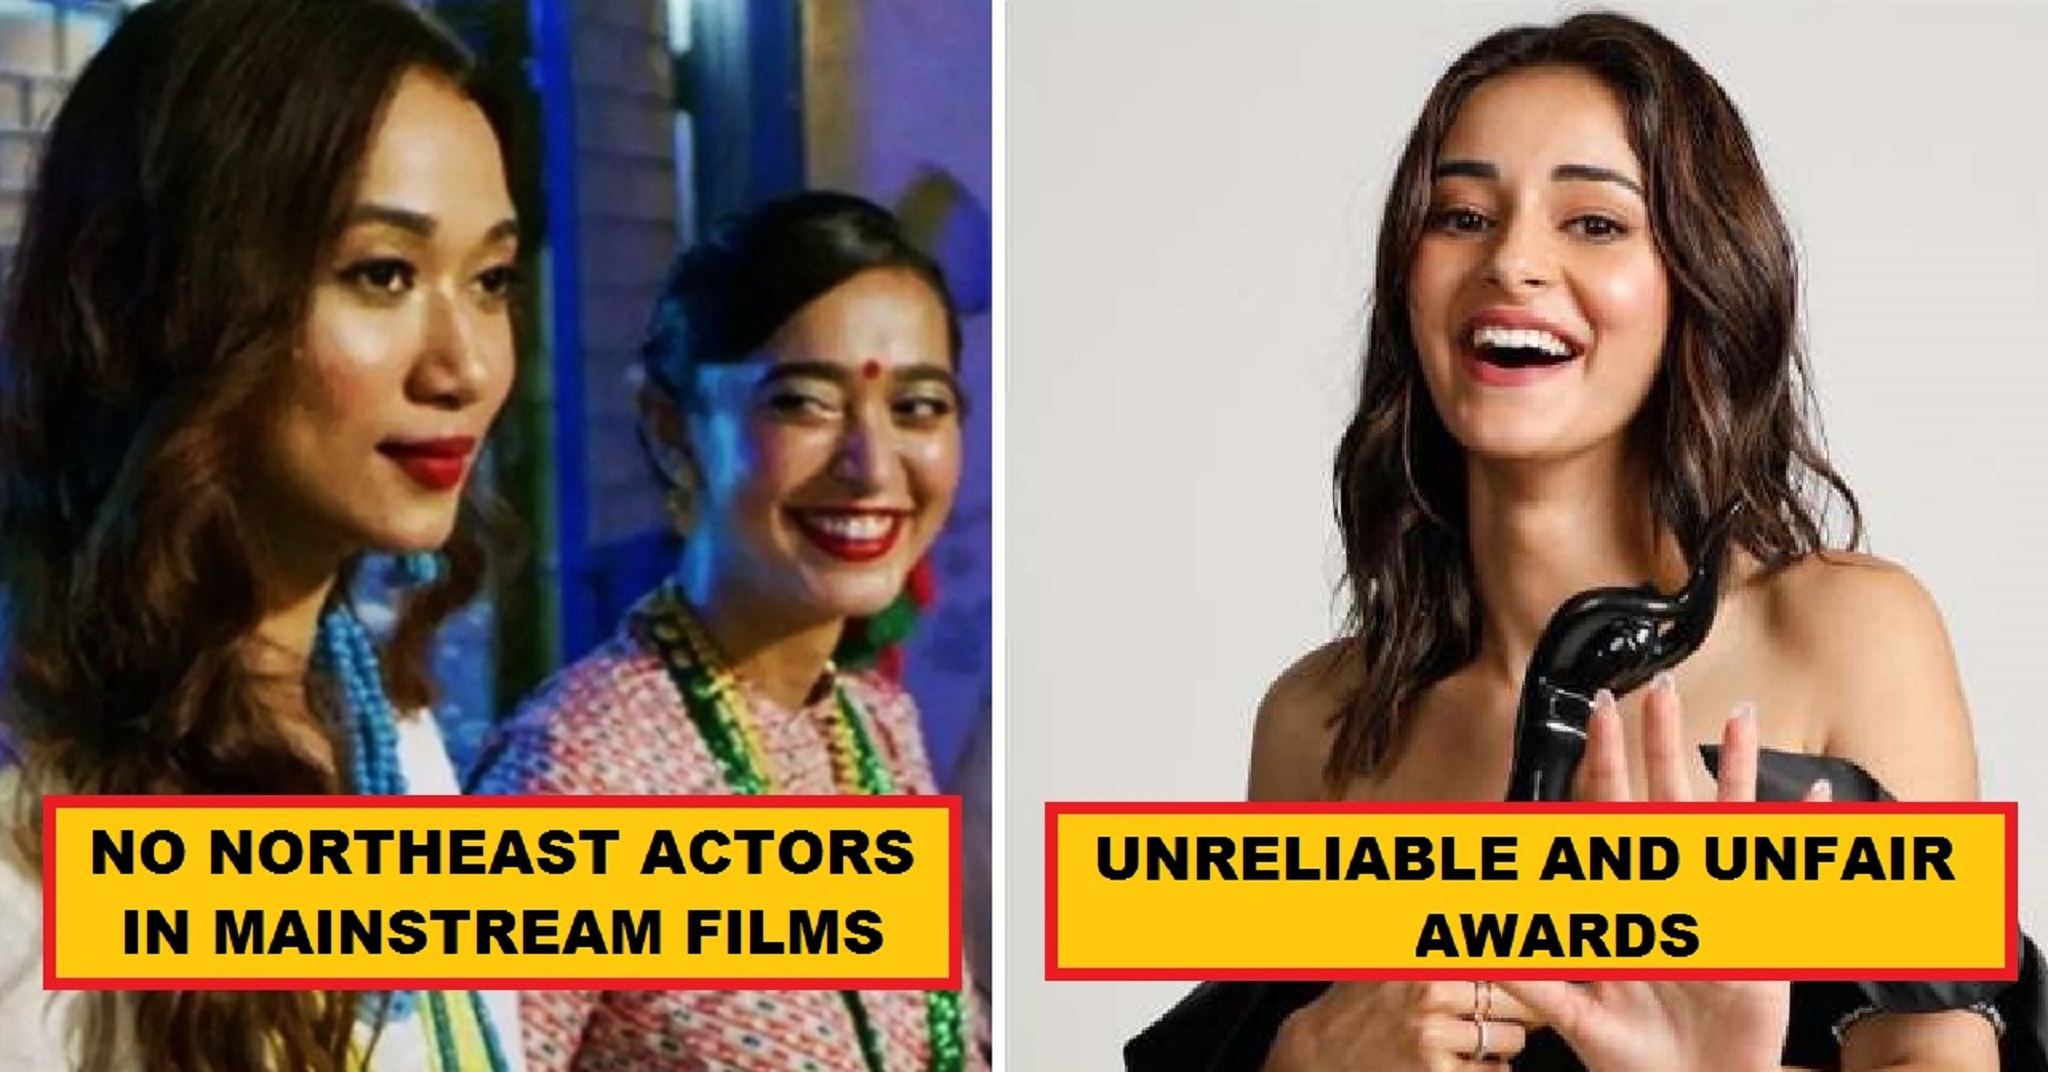 9 Things That Bollywood Should Change For the Better